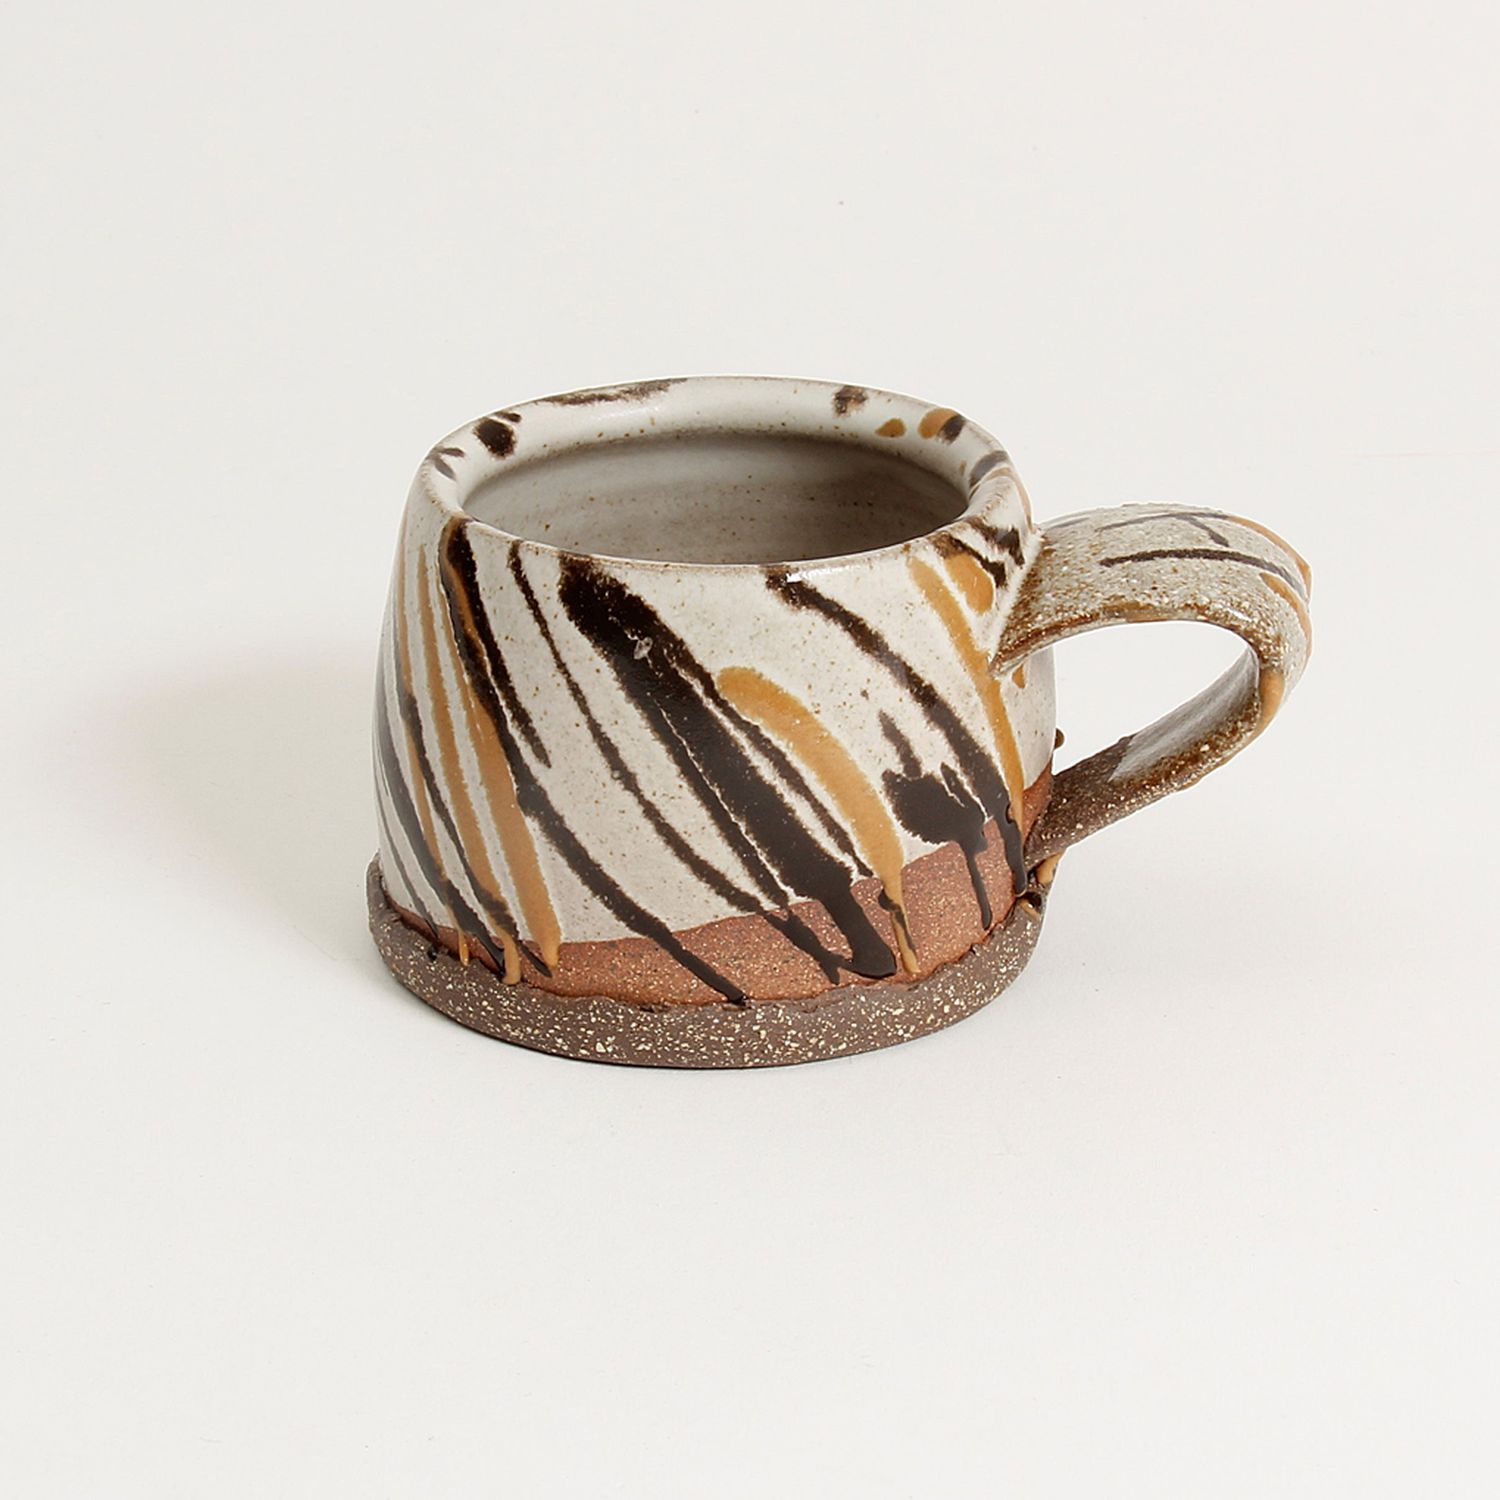 Gracia Isabel Gomez: Espresso mug in Brown Chocolate Product Image 1 of 6